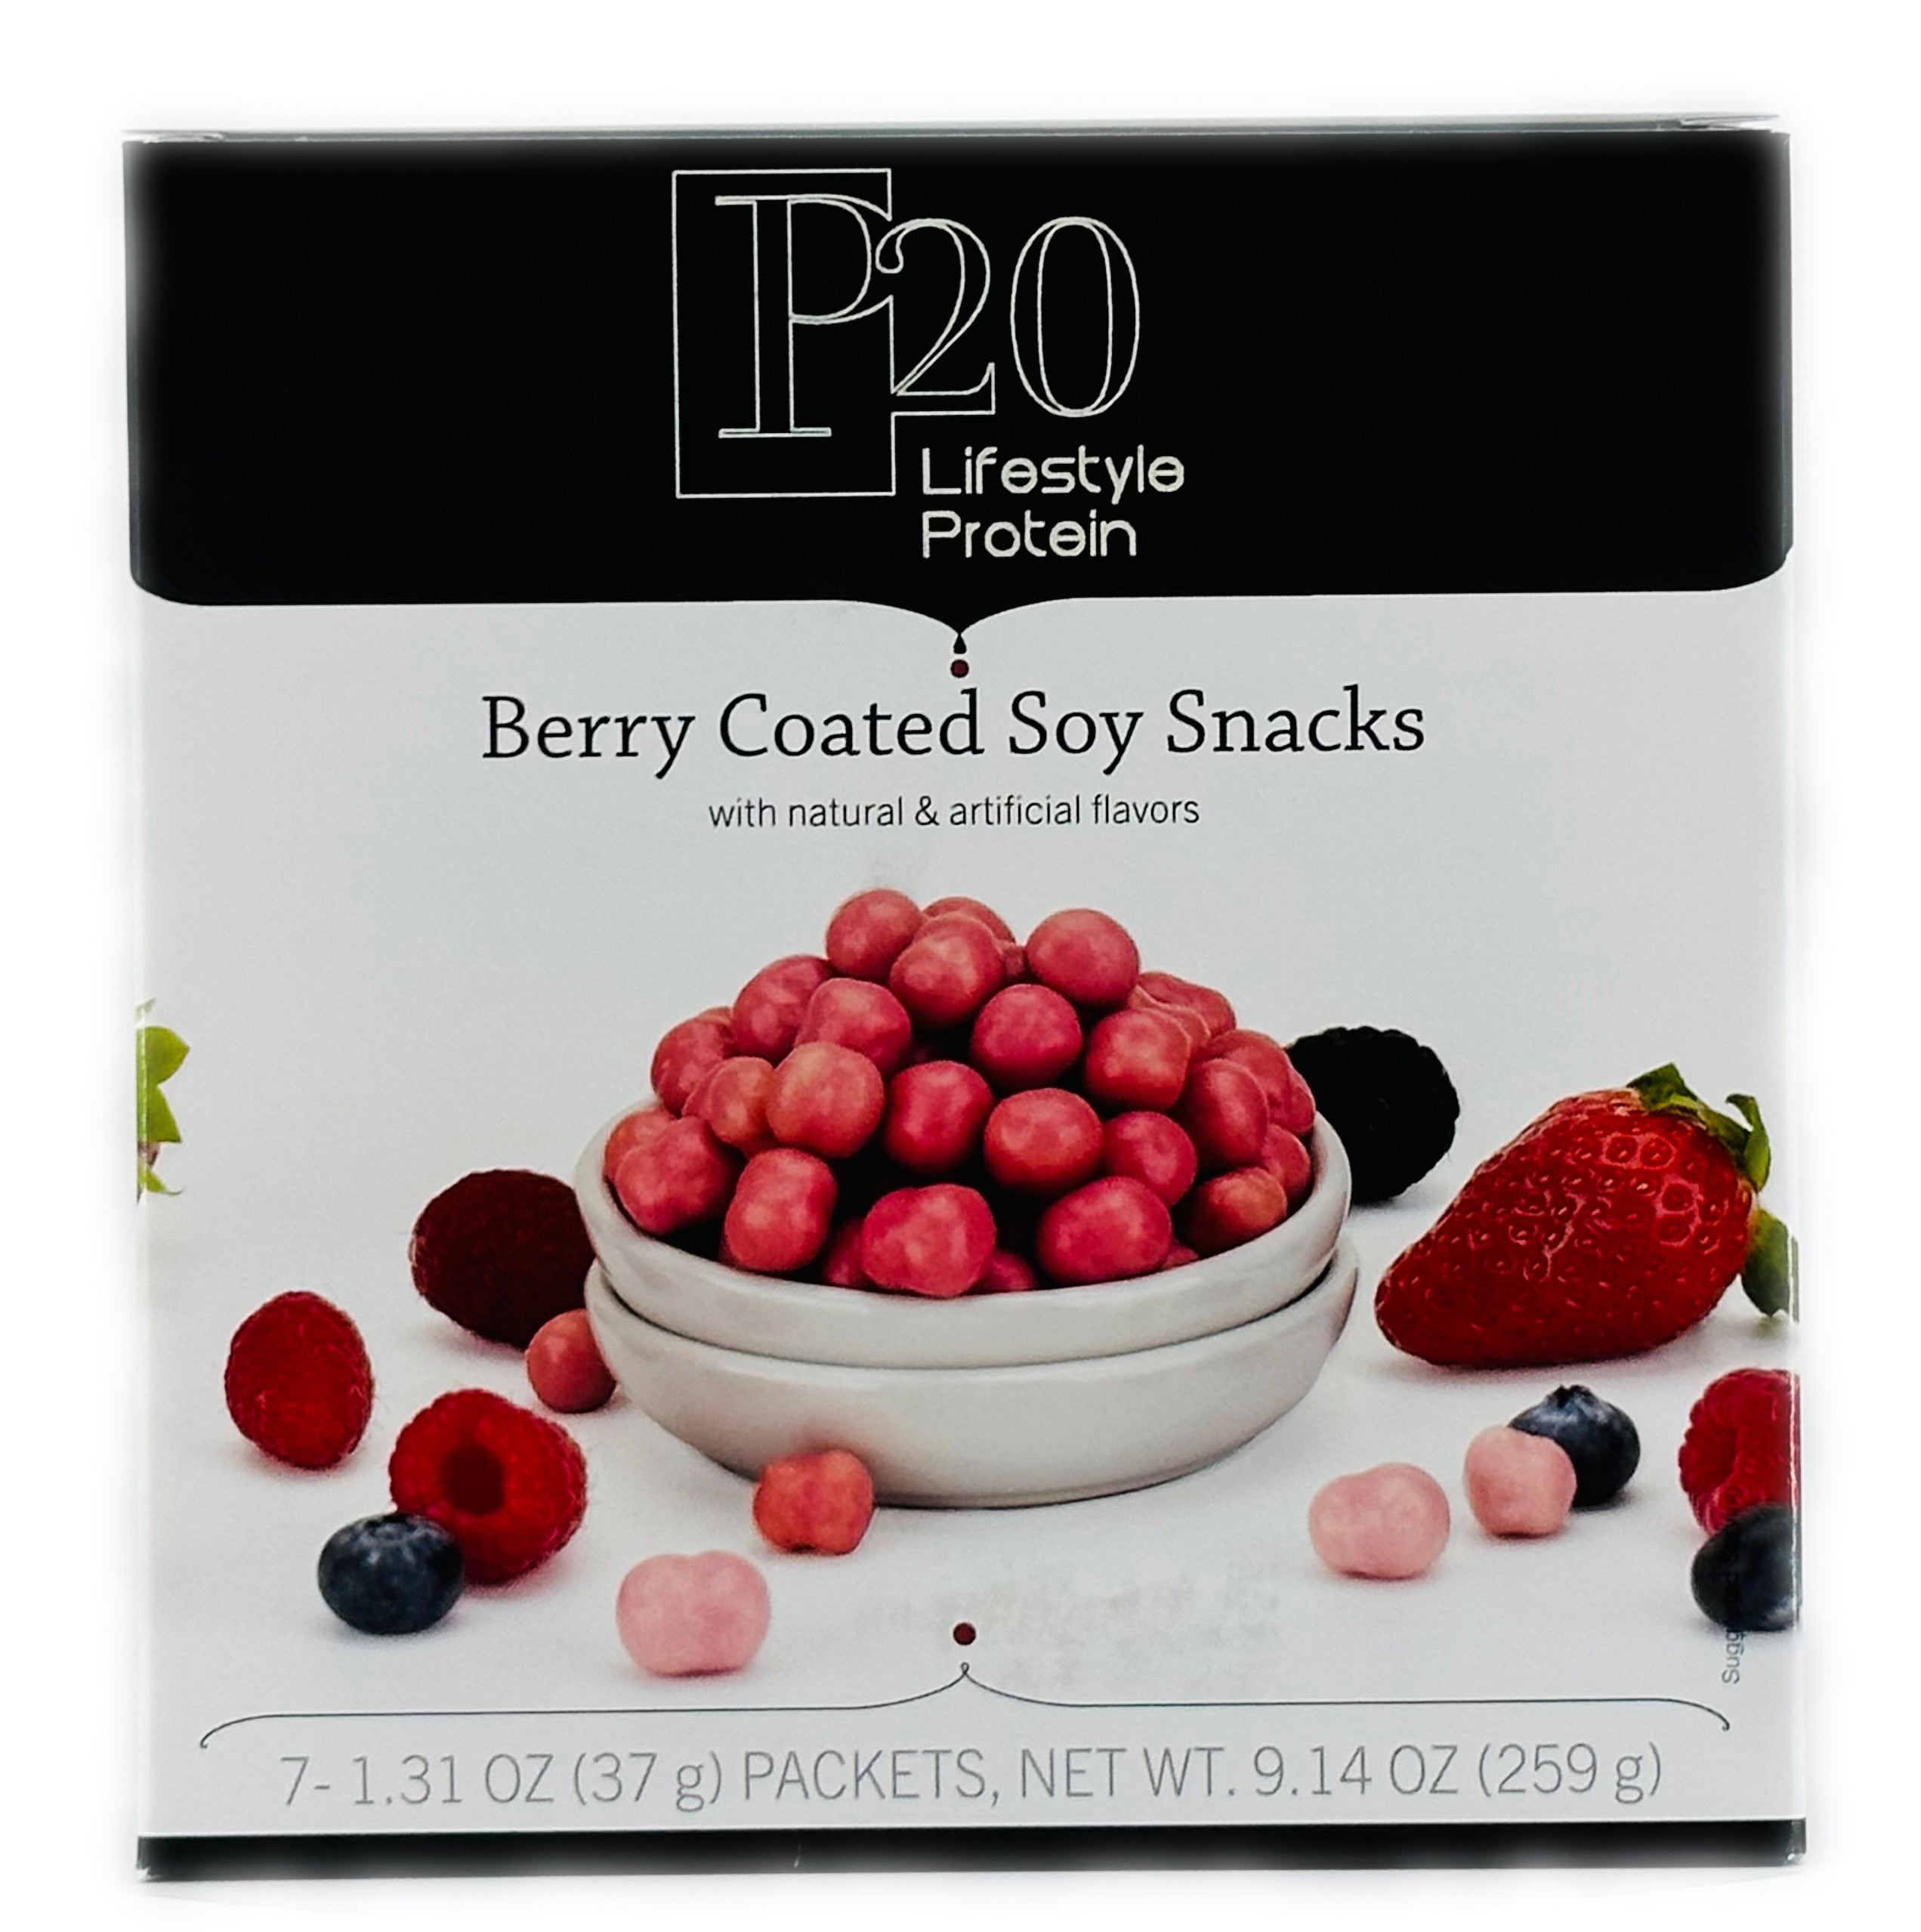 Berry Coated Soy Snacks - P20 Lifestyle Protein